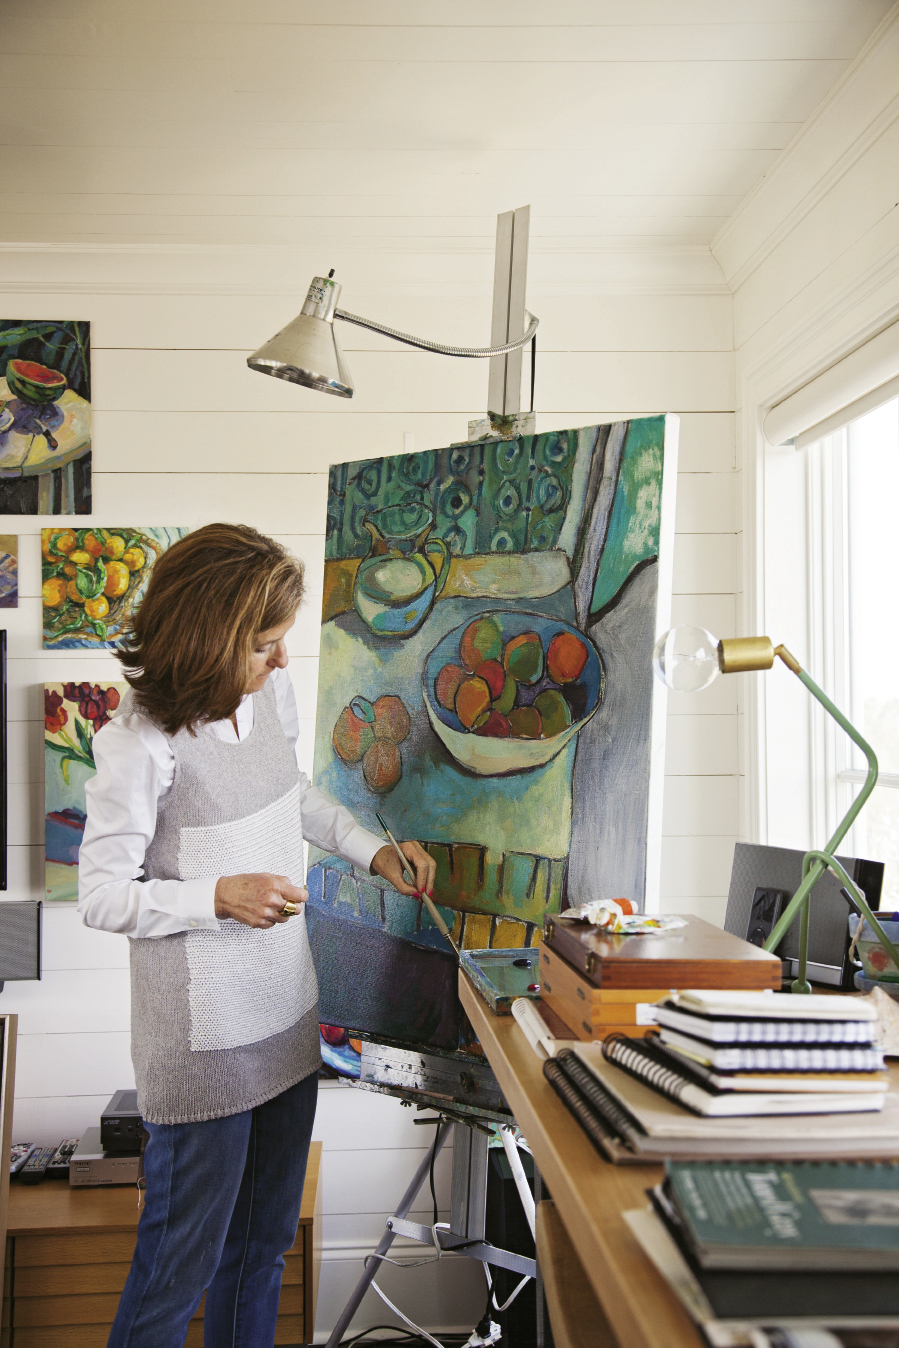 Each day, the artist spends time painting in her sunlit third-floor studio.